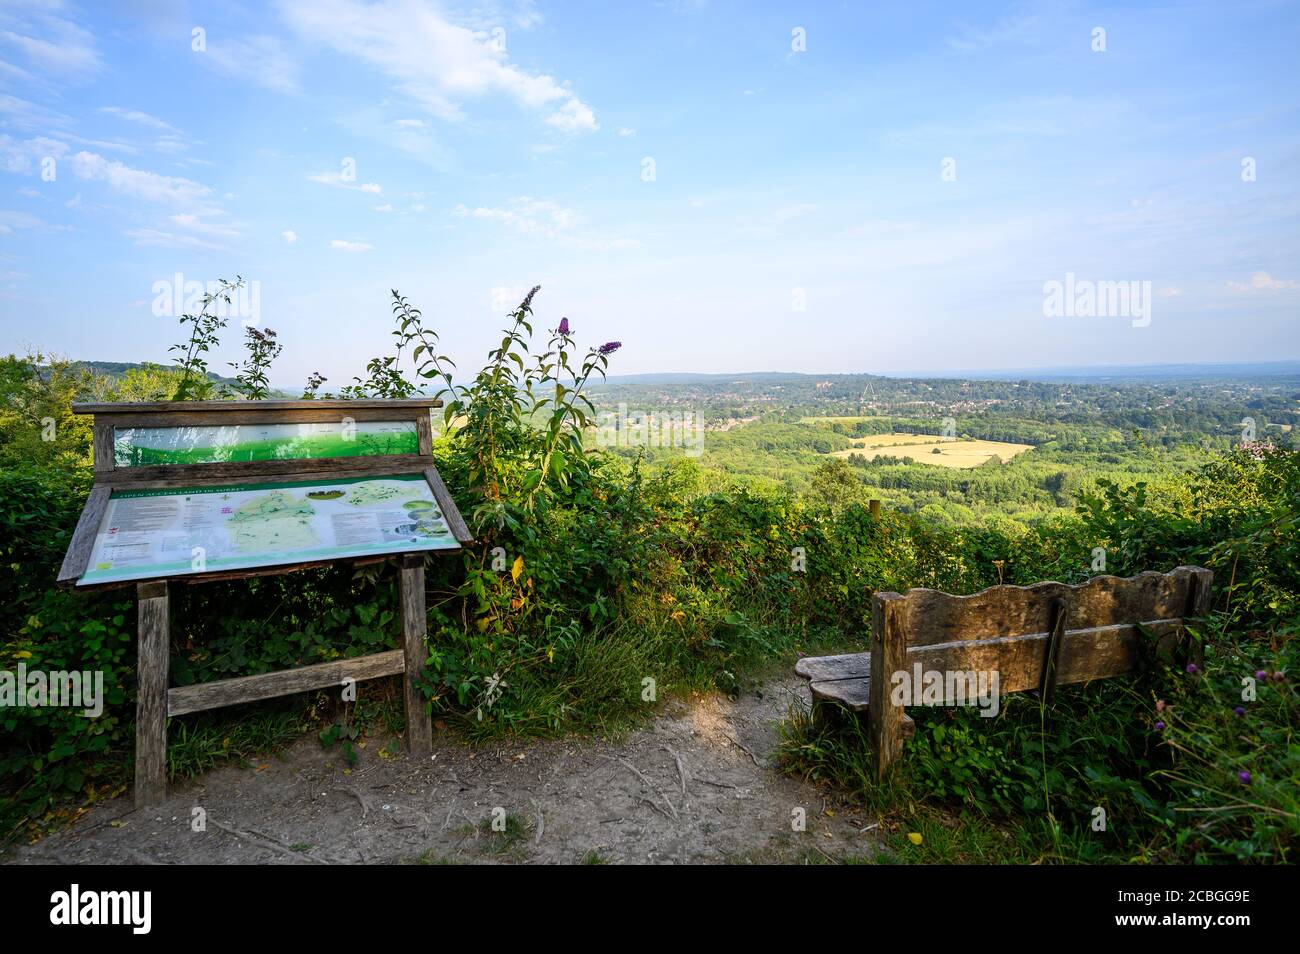 A viewpoint on the North Downs Way near Woldingham in Surrey, UK. The North Downs is part of the Surrey Hills Area of Outstanding Natural Beauty. Stock Photo